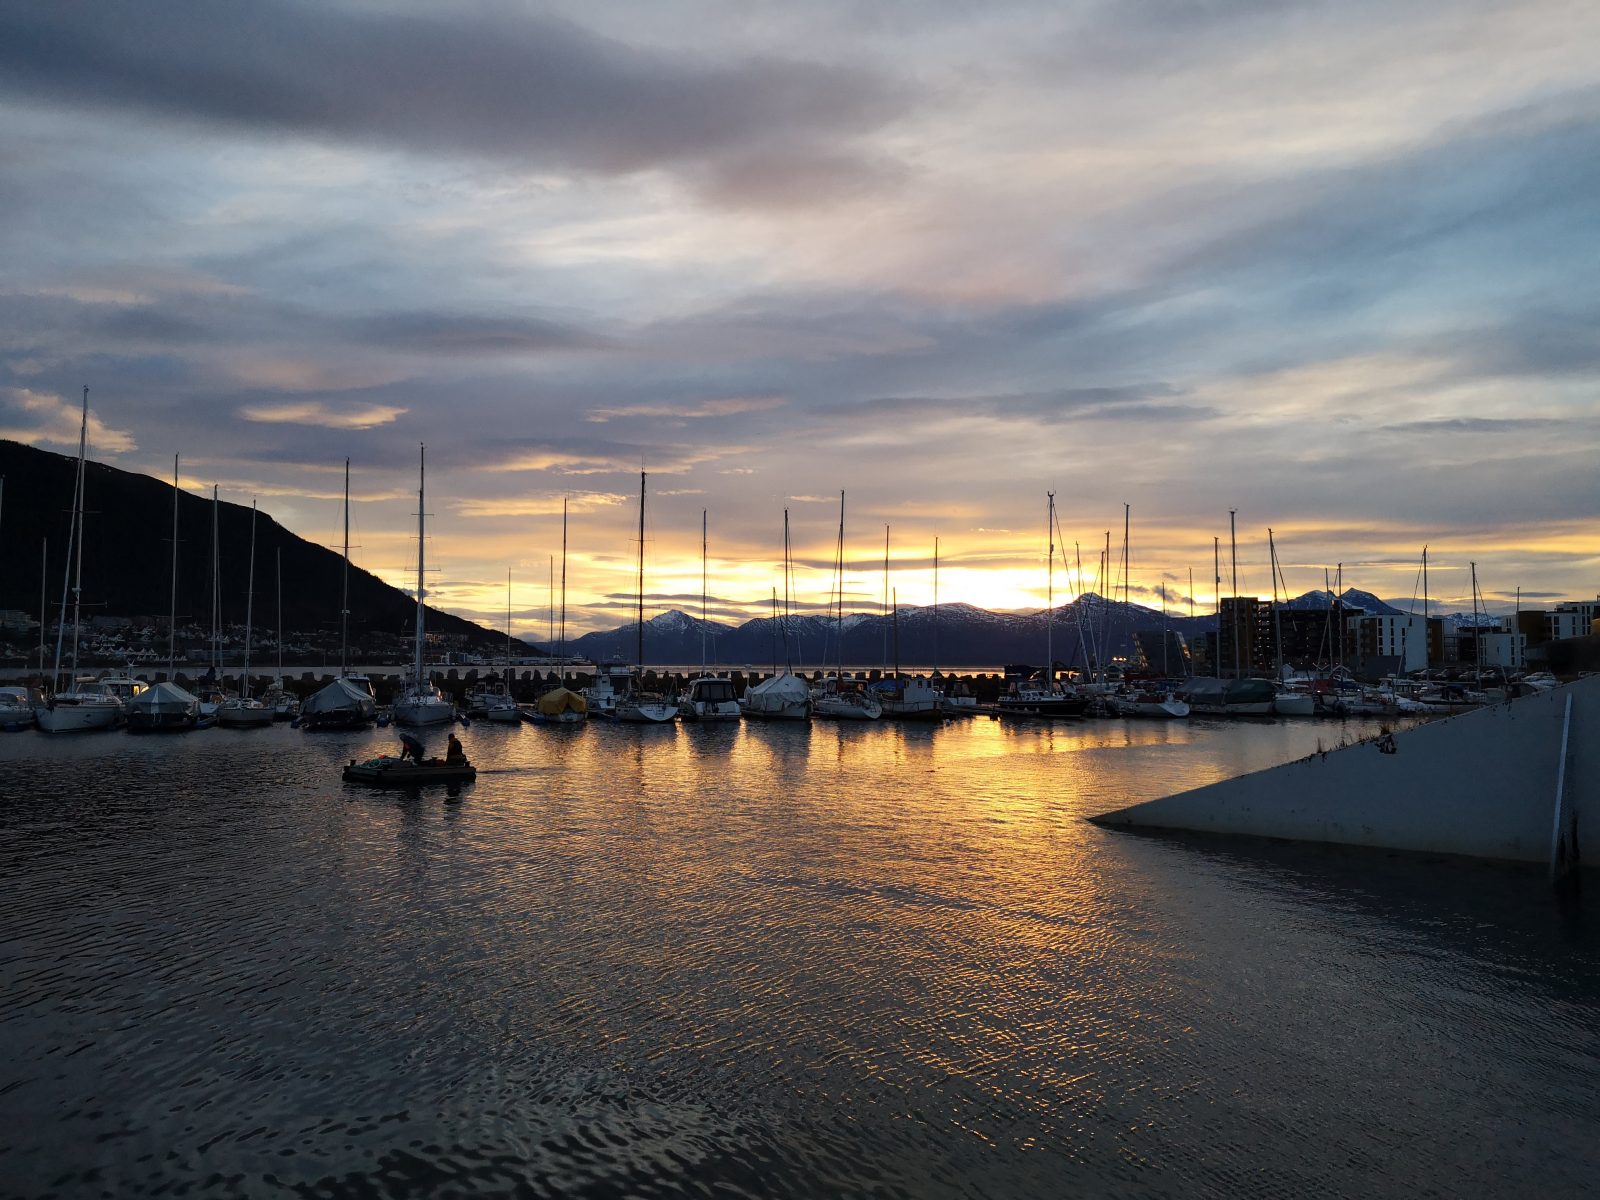 The sailing port in Tromso, with a sunset in the background.